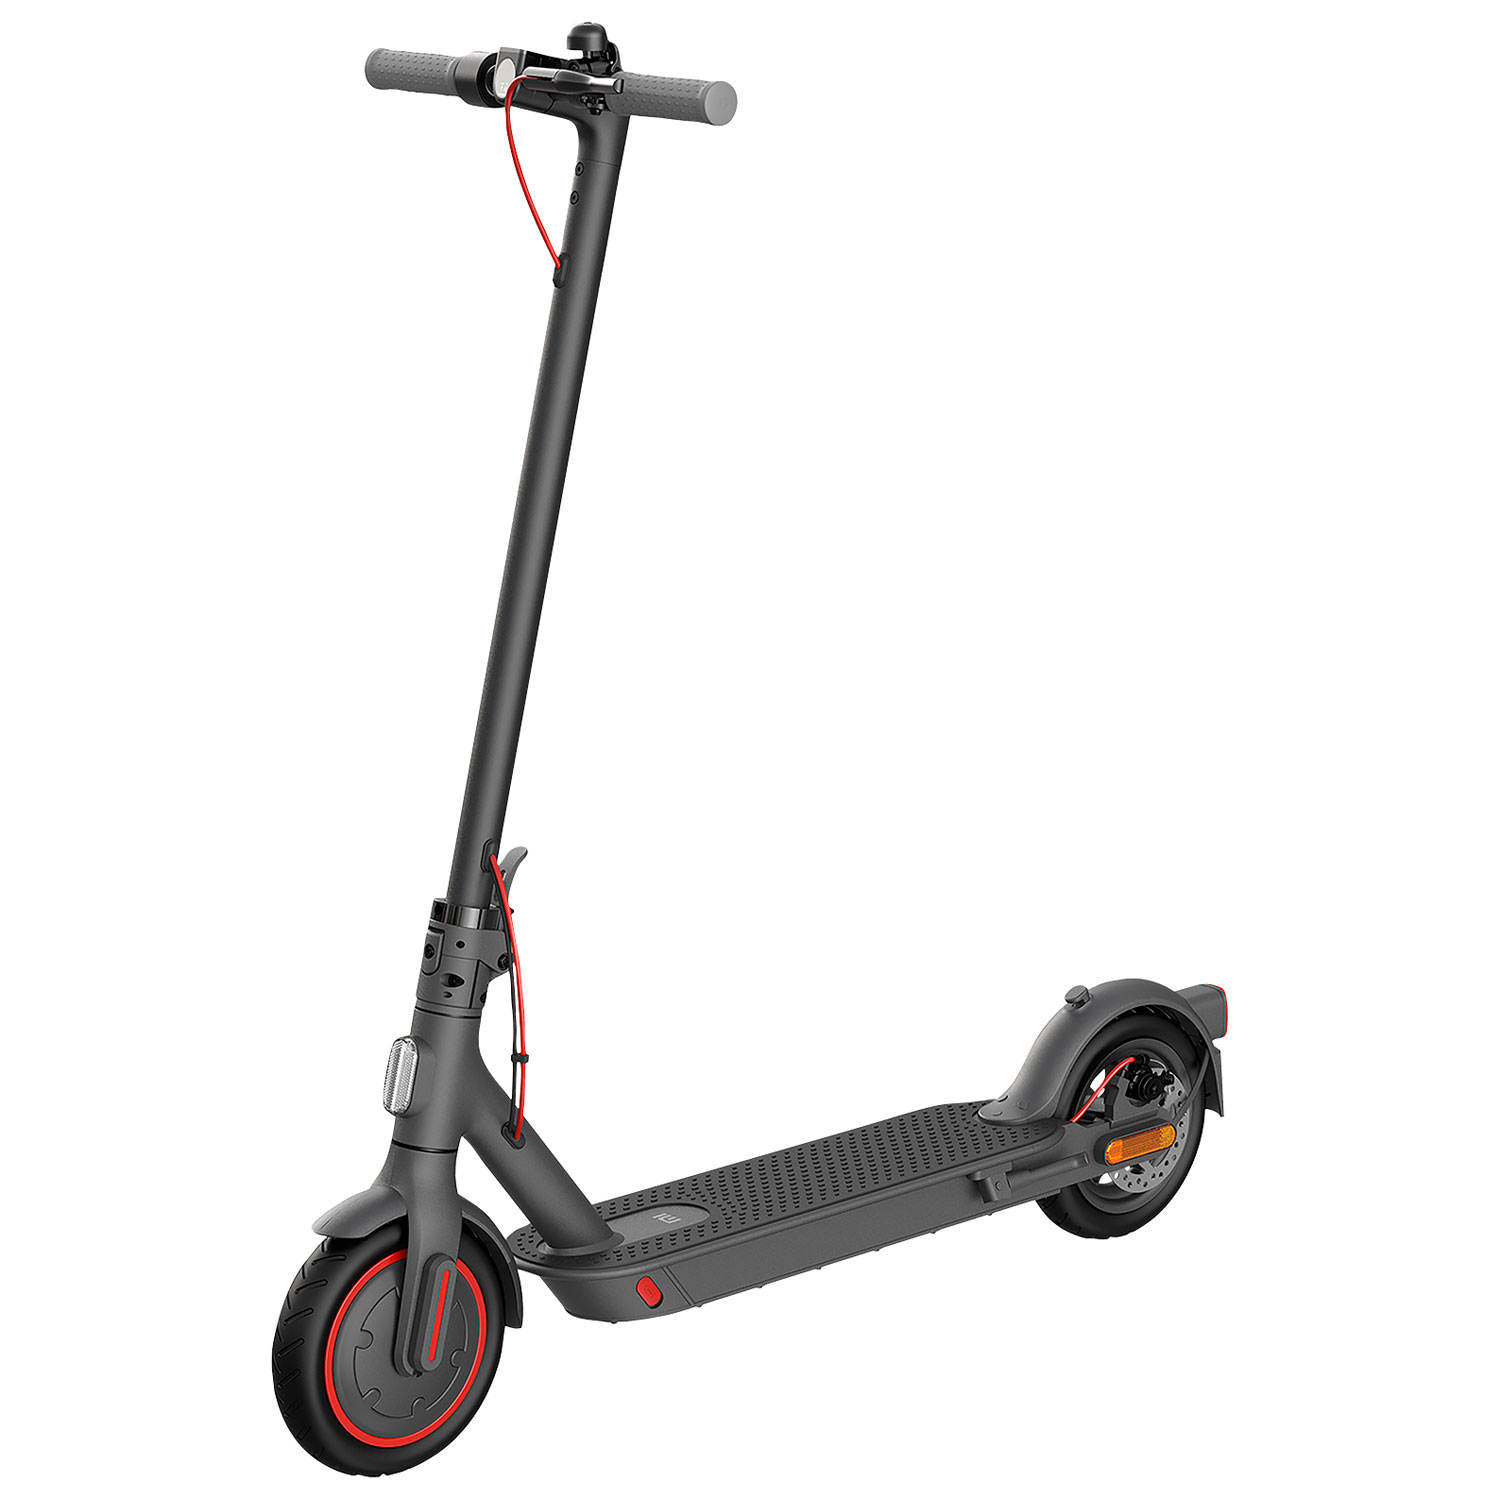 Xiaomi Mi Electric Scooter Pro 2 (300 Motor / 45km Range / 25km/h Top Speed) - Black - Only at Best Buy